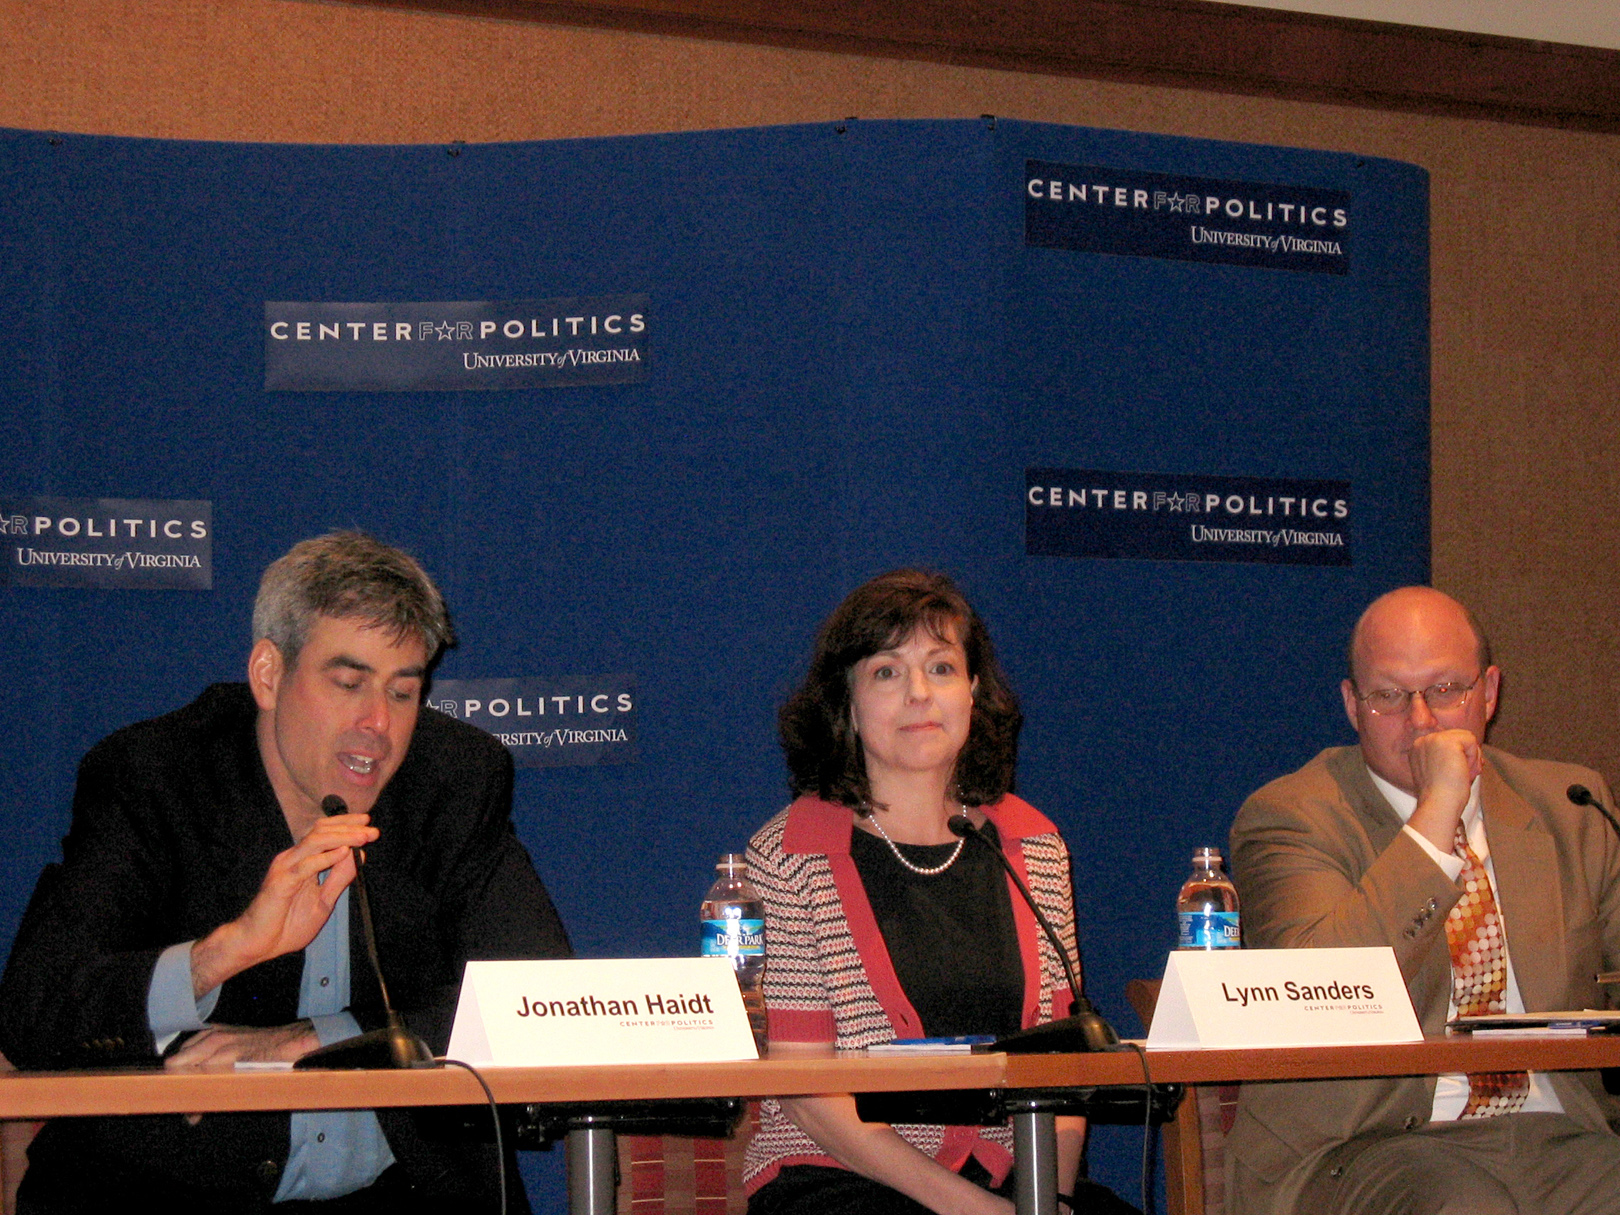 Panelists sitting at a table answering questions